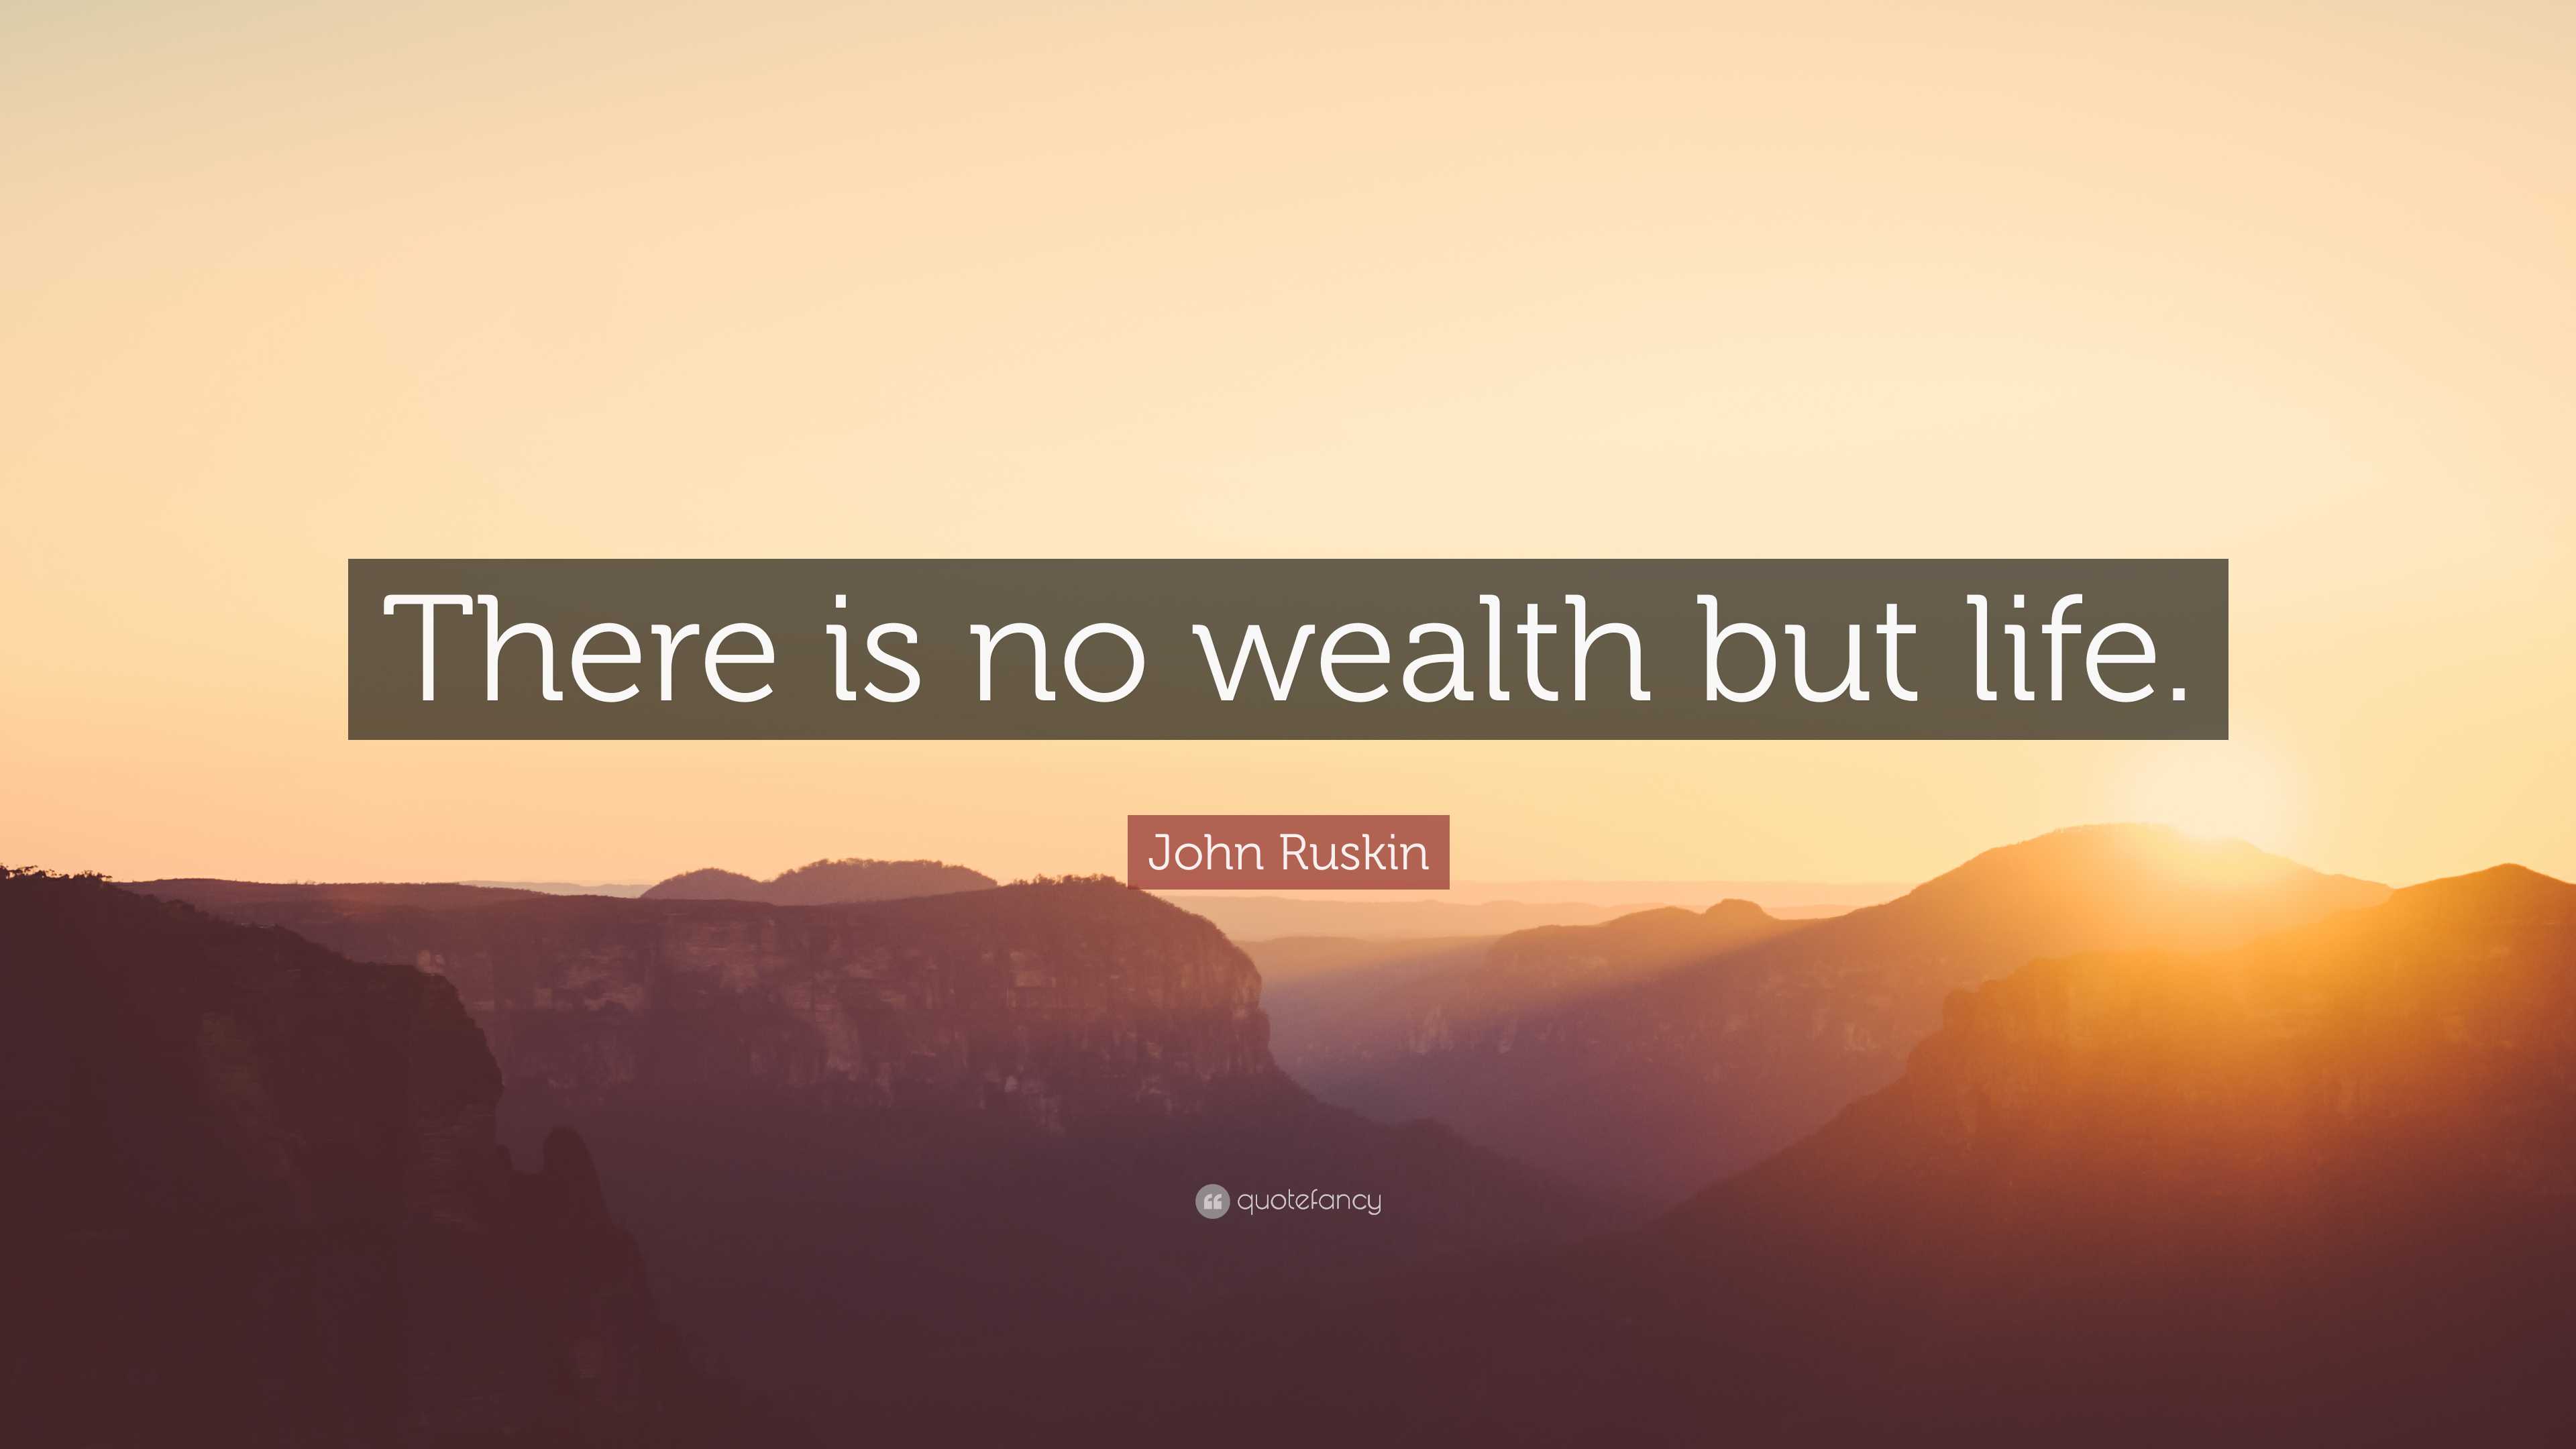 John Ruskin Quote: “There is no wealth but life.”